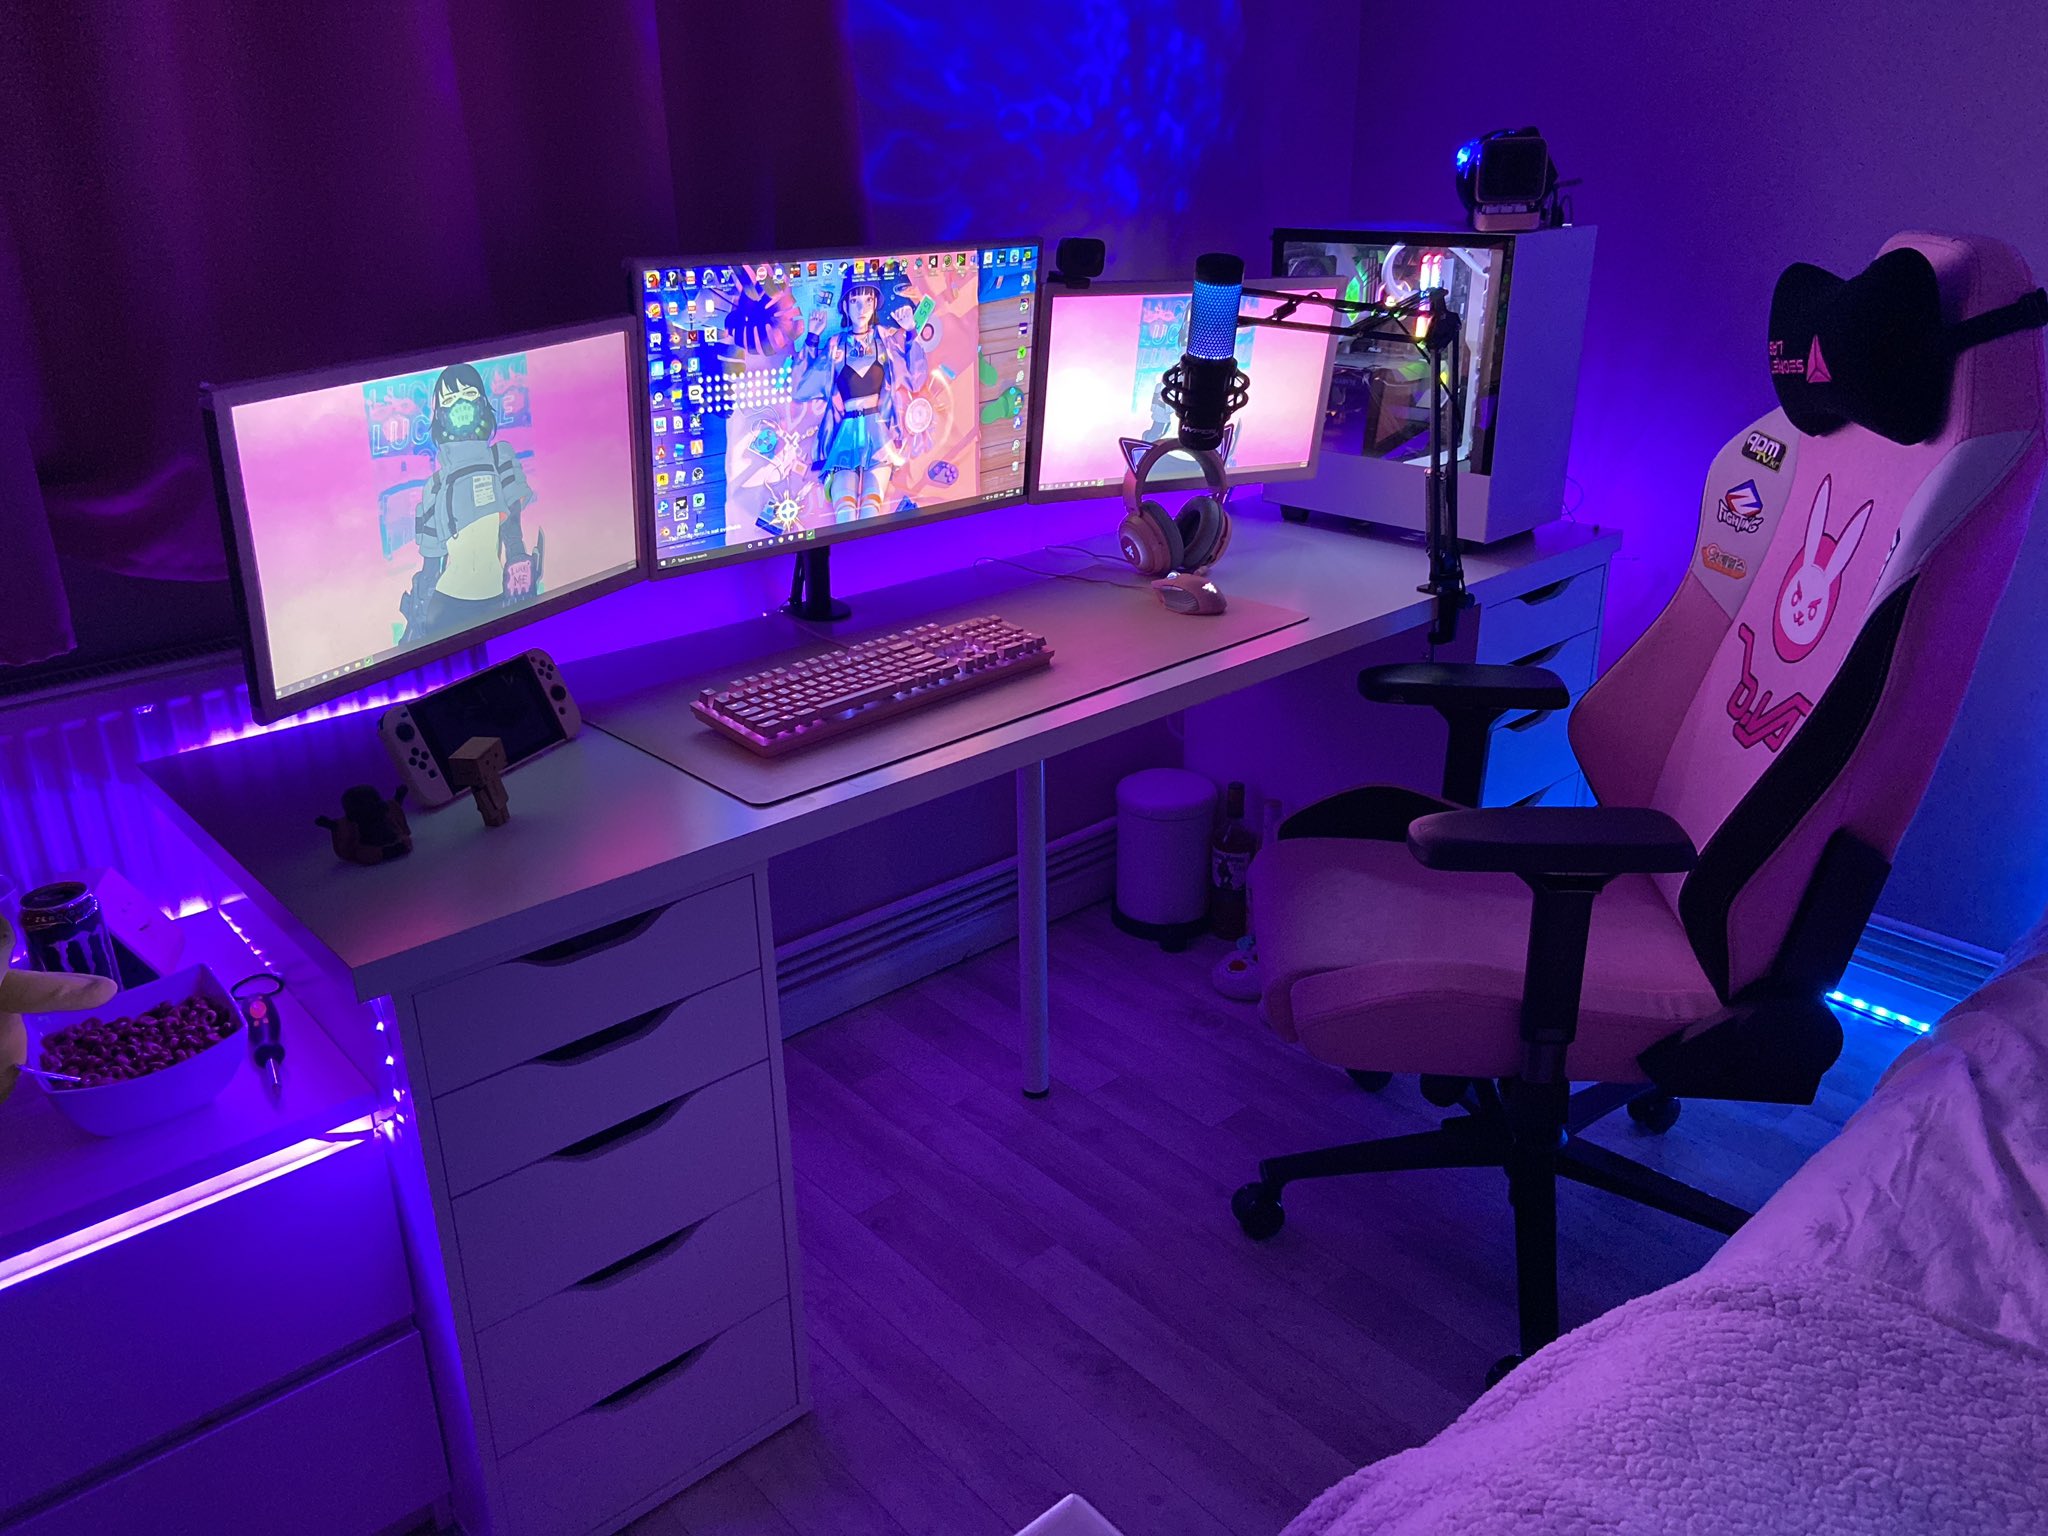 Hey guys/girls! I recently added the BenQ ScreenBar to my setup, let me  know what think of my setup! :) : r/battlestations